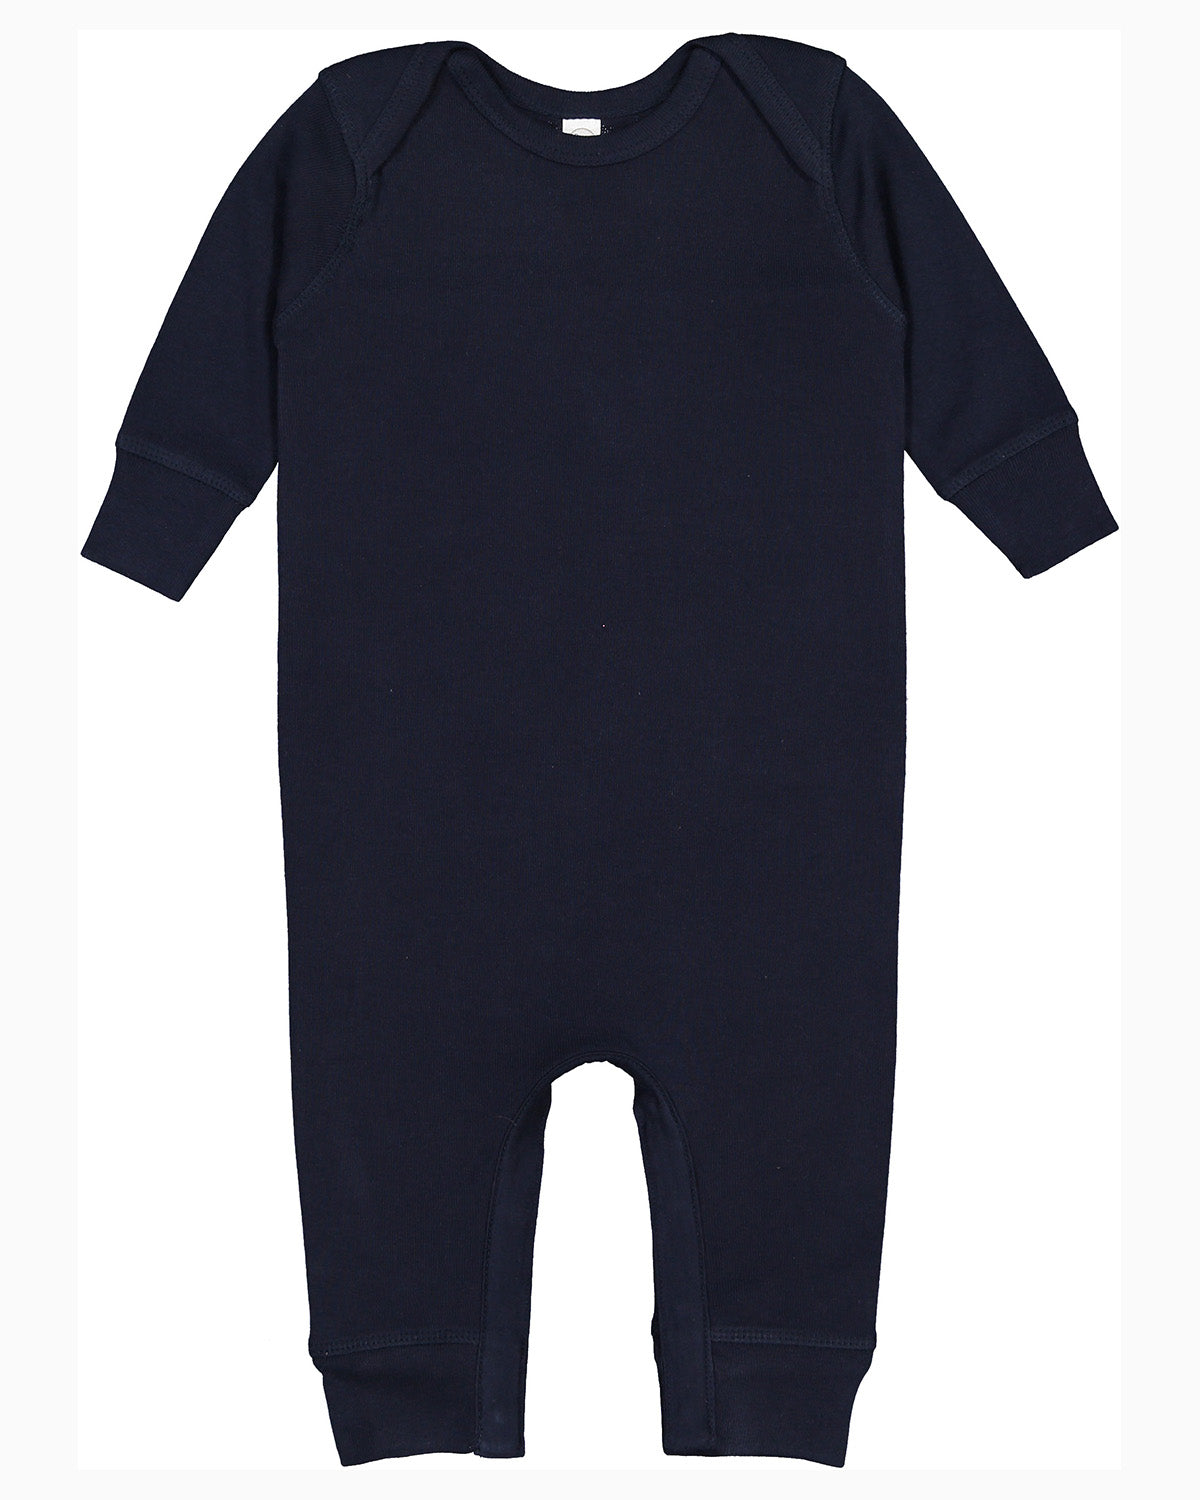 Infant Baby Rib Coverall - 4412